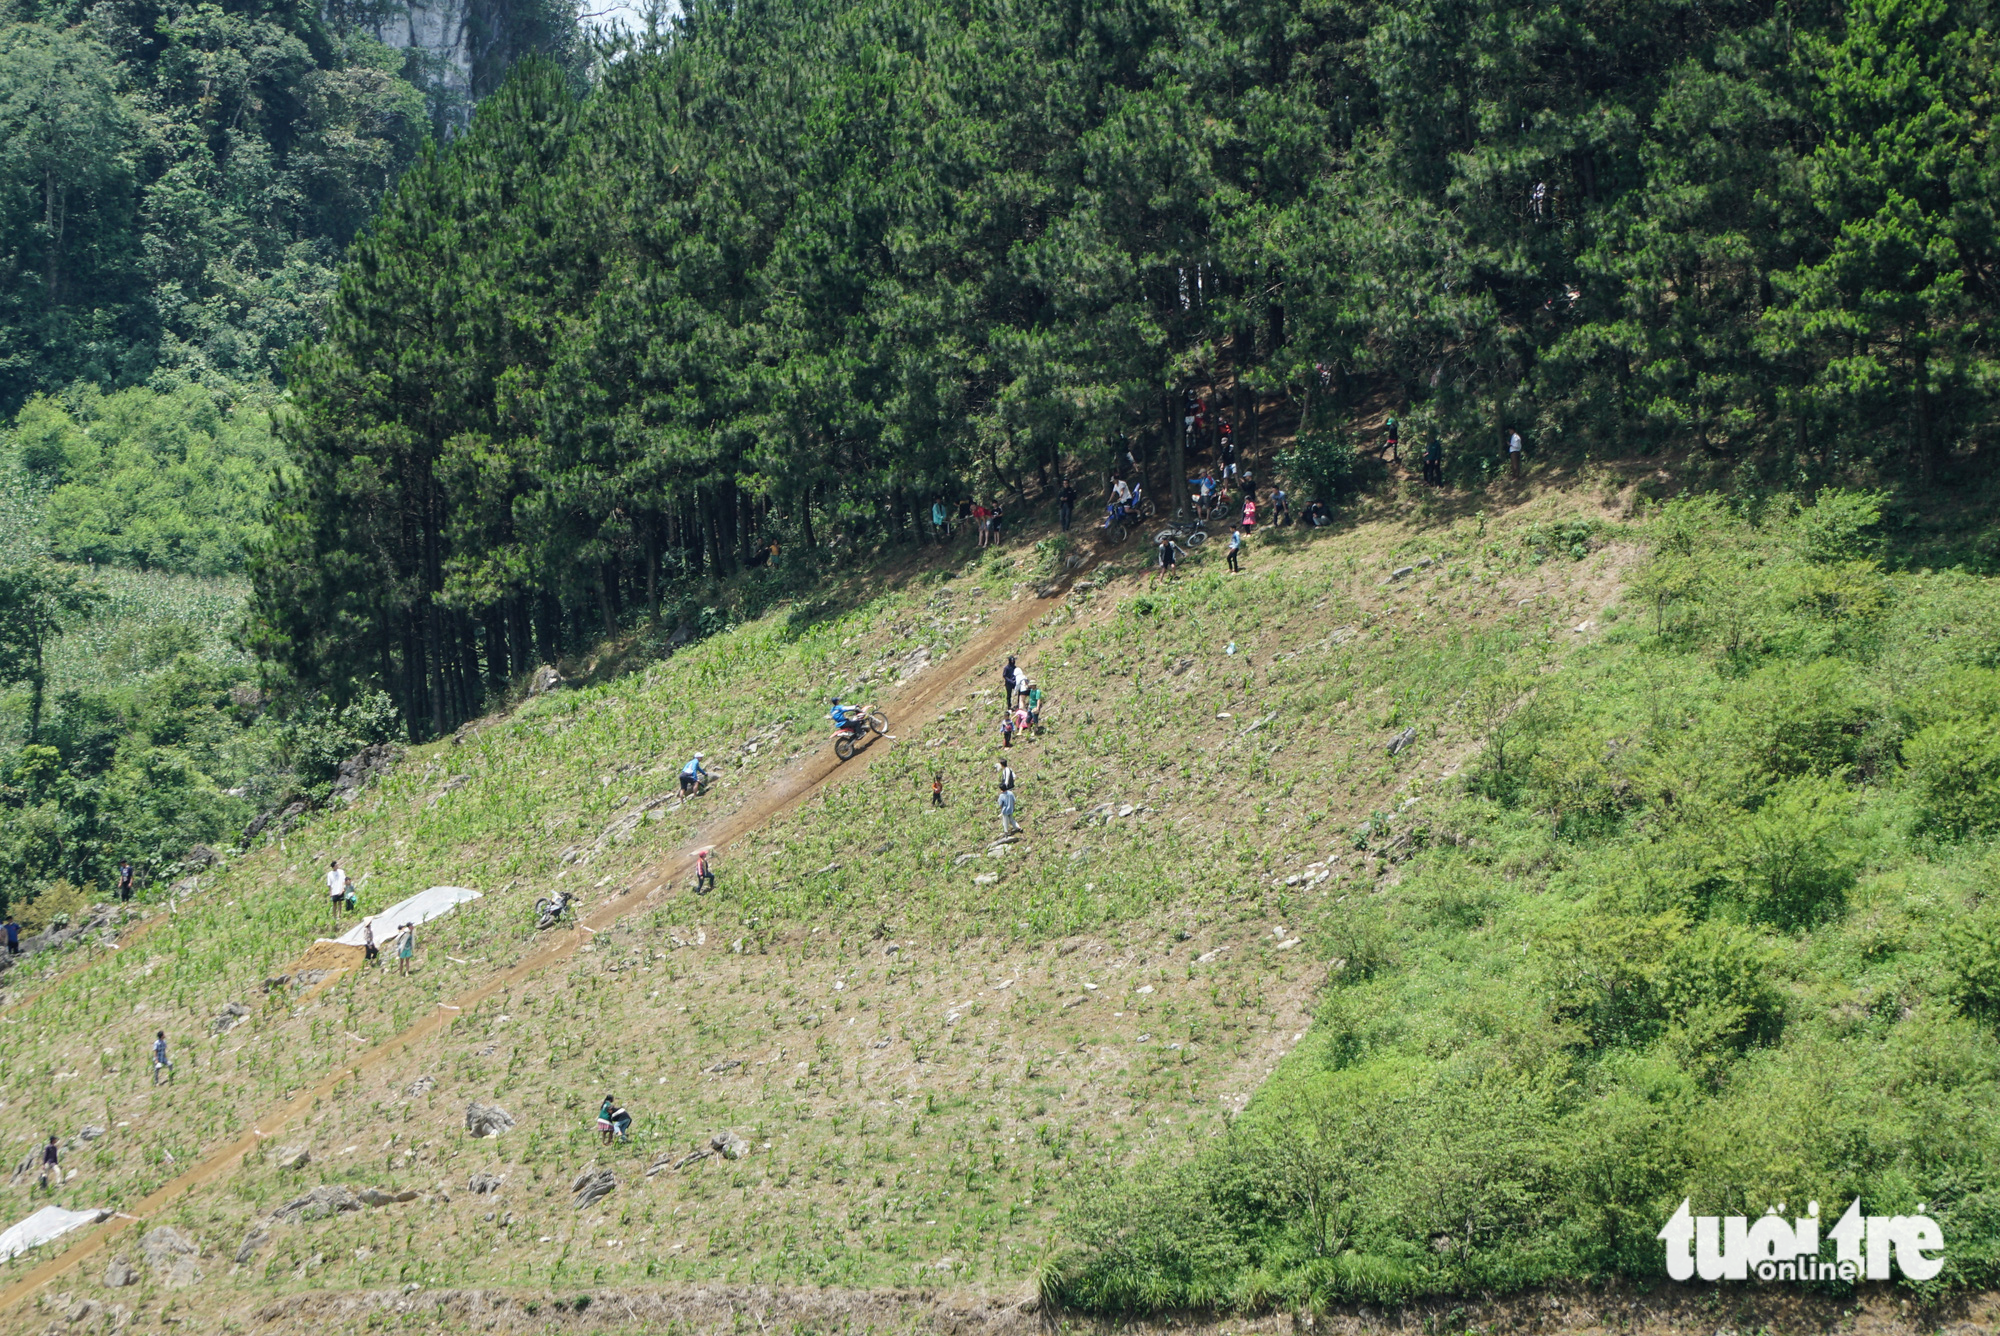 Racers ascend uphill in the final race of the 2023 VTV Cab - Off-road motorcycle racing tournament in Van Ho District, Son La Province, Vietnam, May 28, 2023. Photo: Nguyen Hien / Tuoi Tre